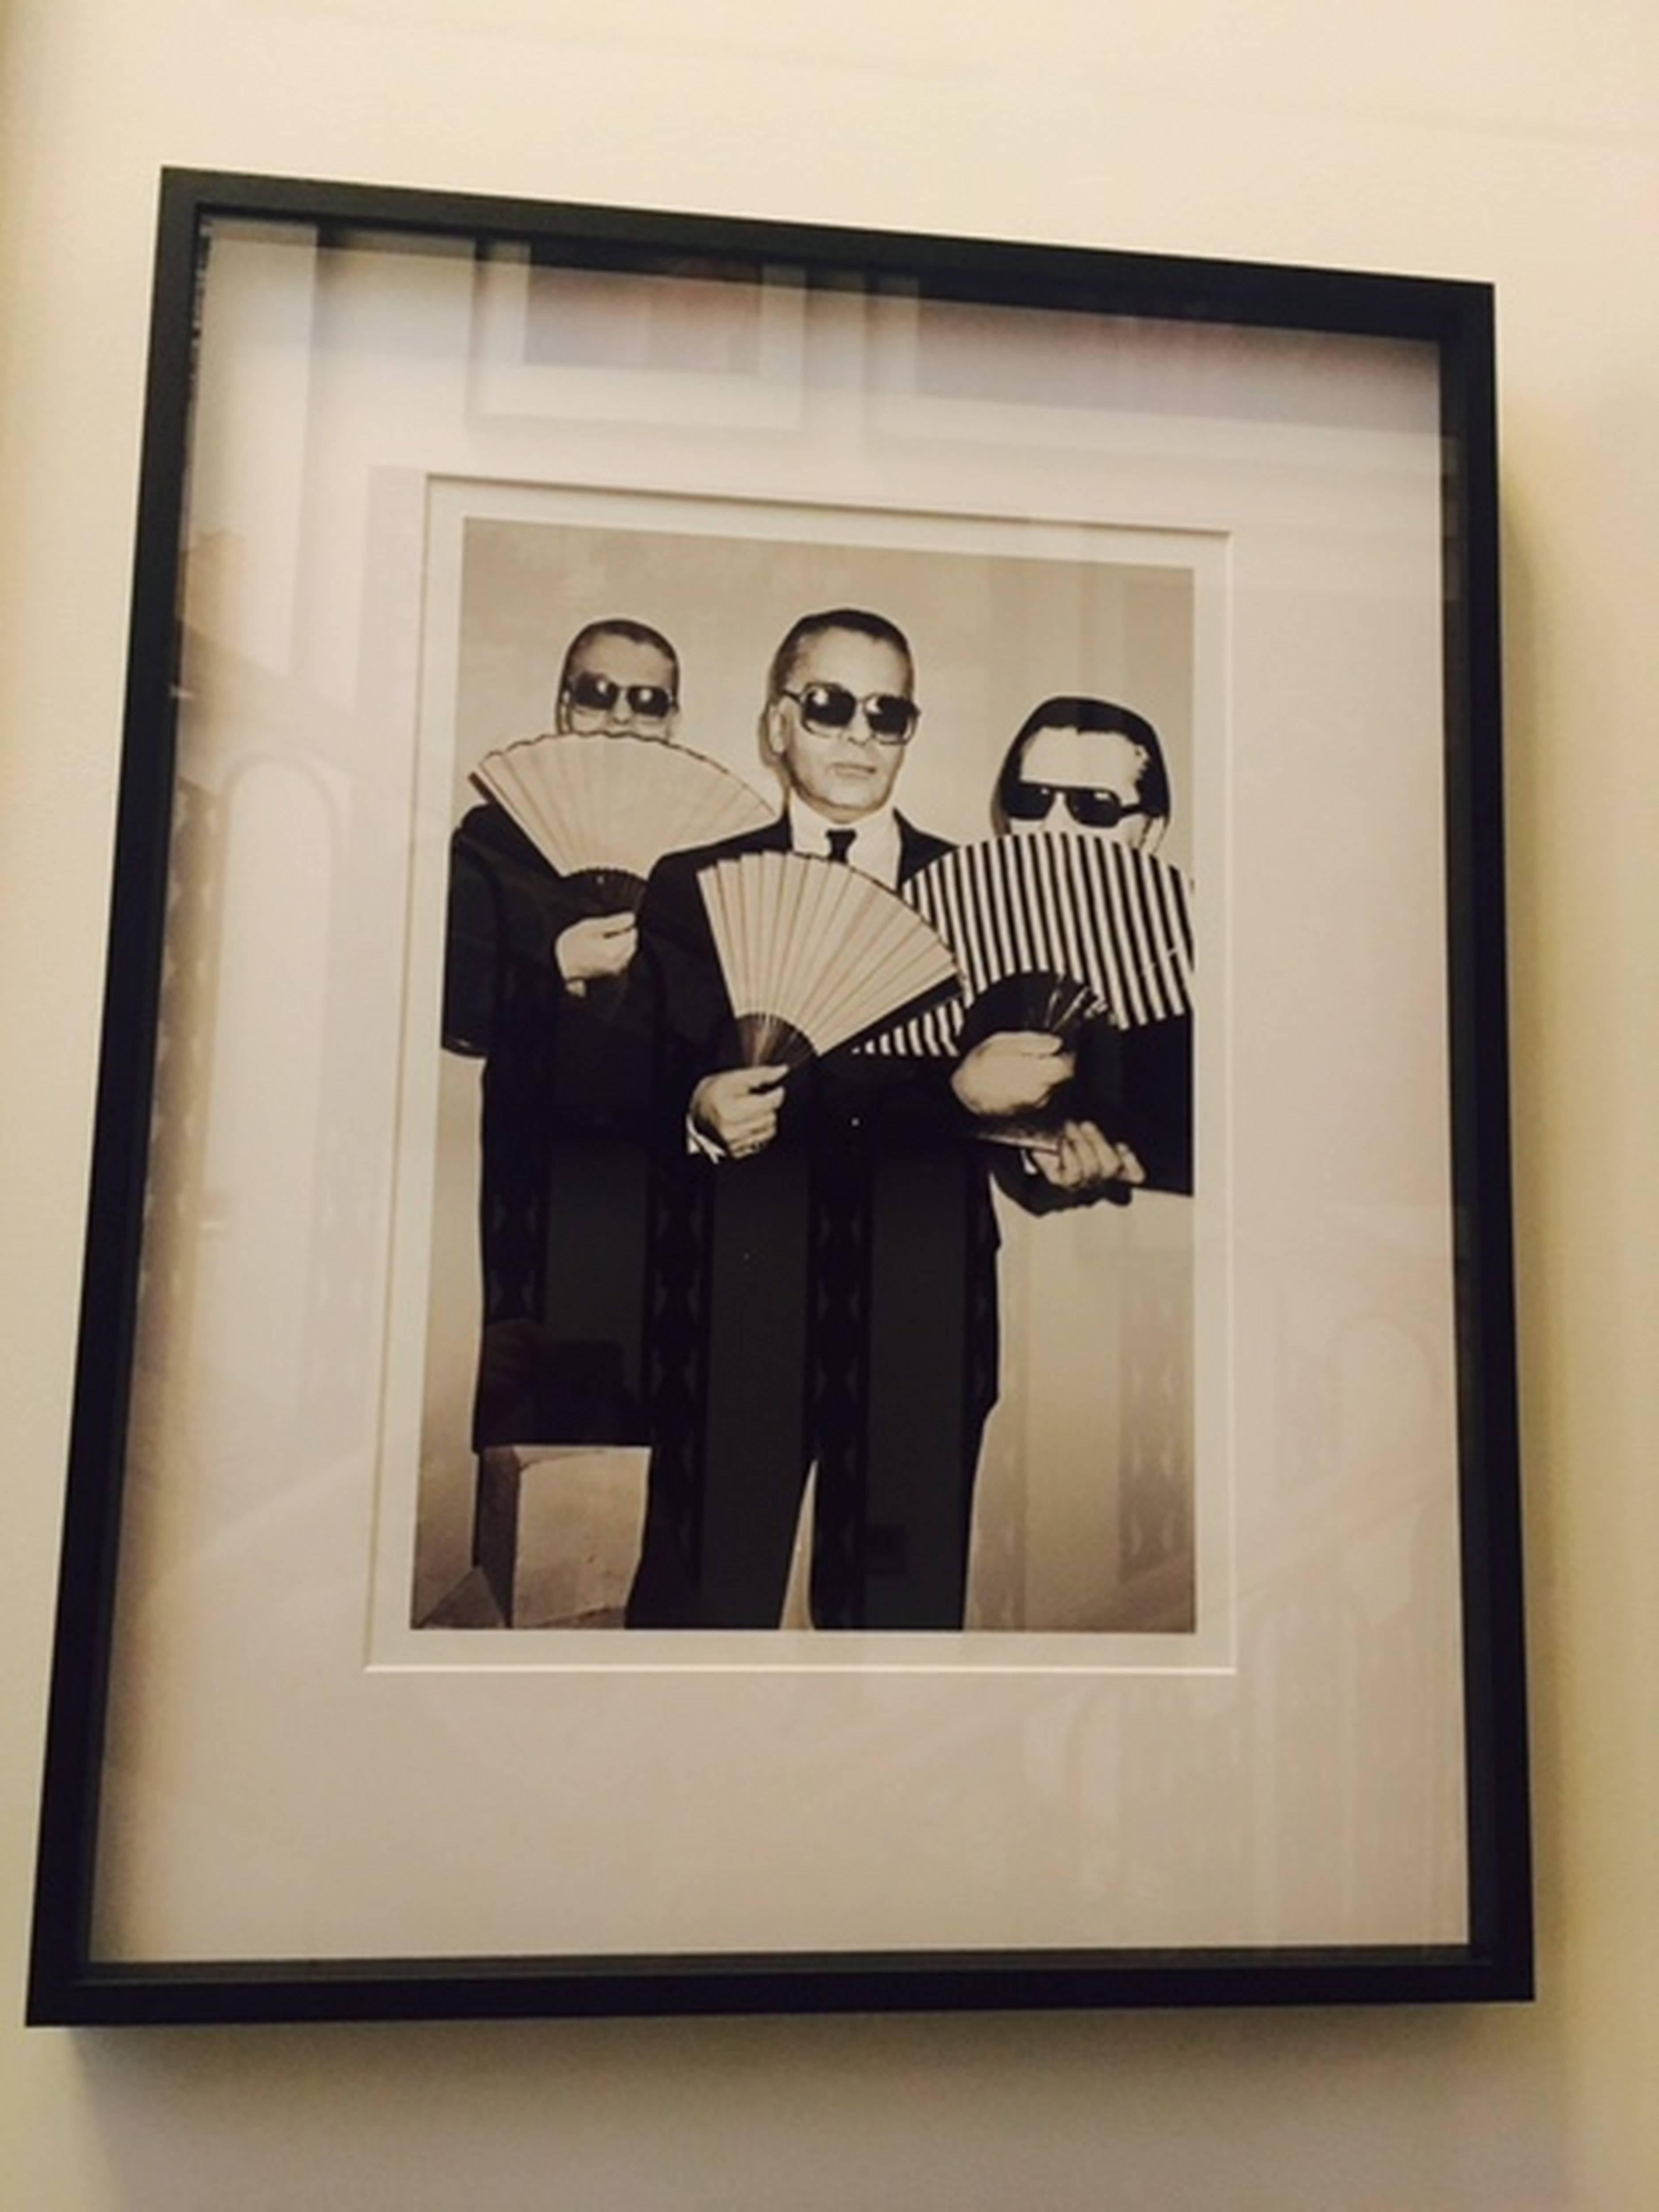 Three Faces of Karl Lagerfeld - b&w portrait of the famous fashion designer - Photograph by Roxanne Lowit